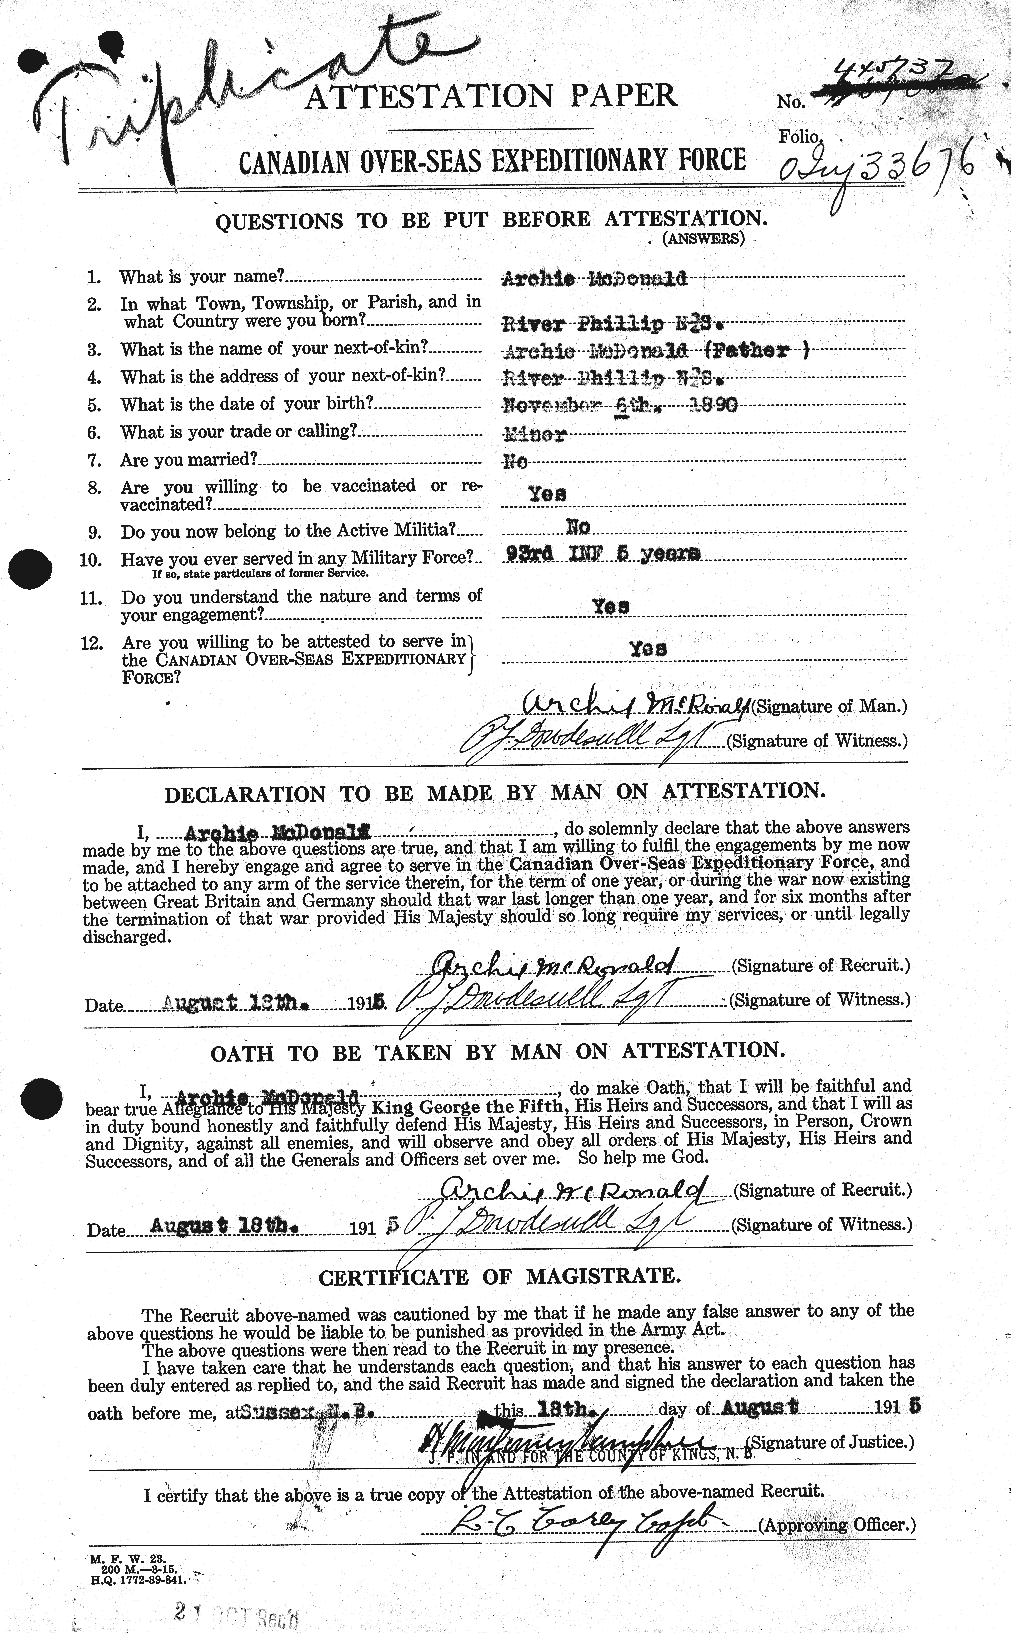 Personnel Records of the First World War - CEF 136599a